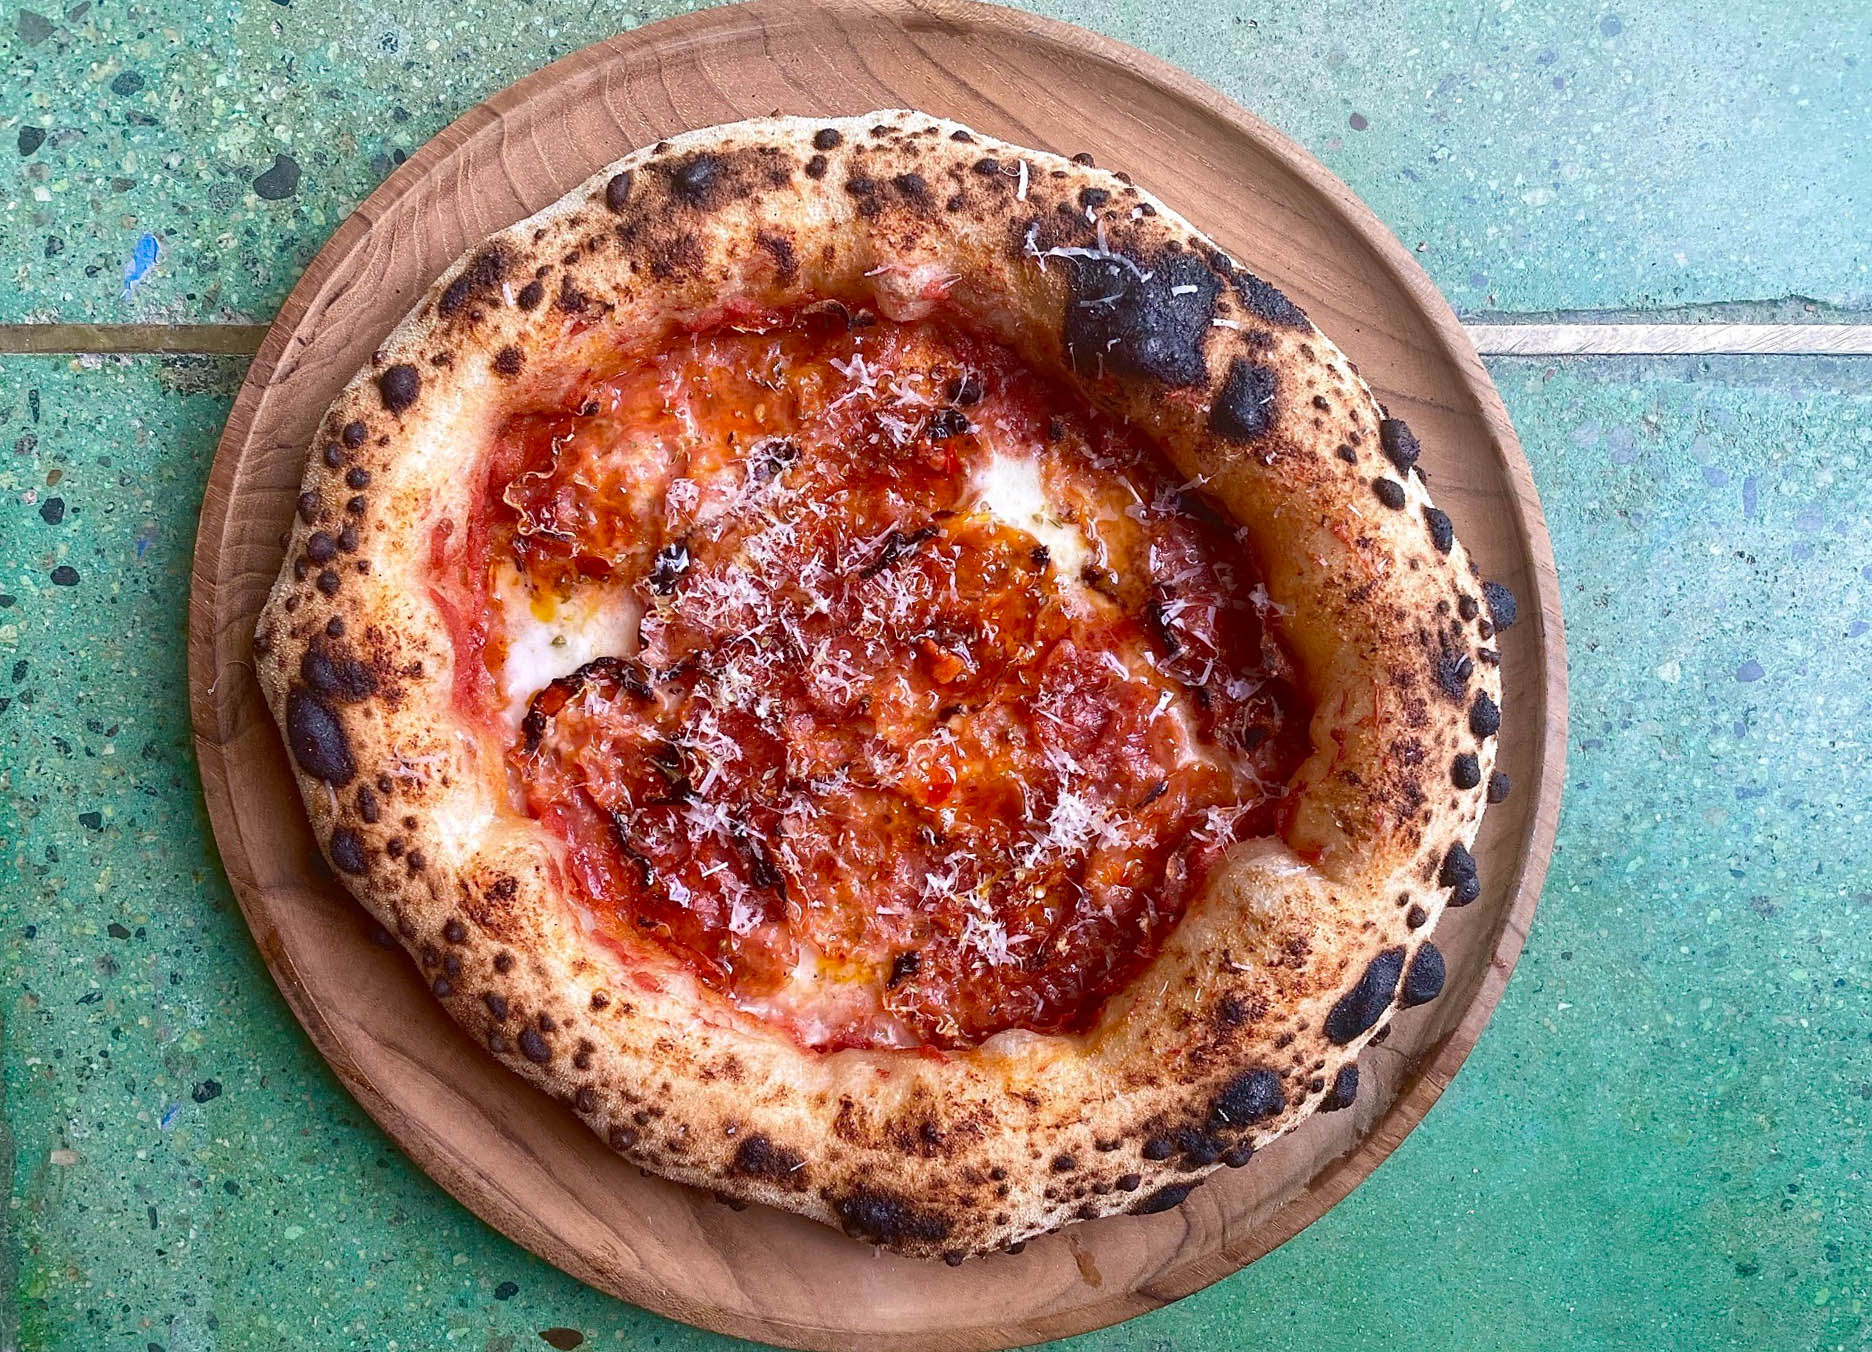 An overhead shot of a puffy crust small pizza on a teal colored marble floor.